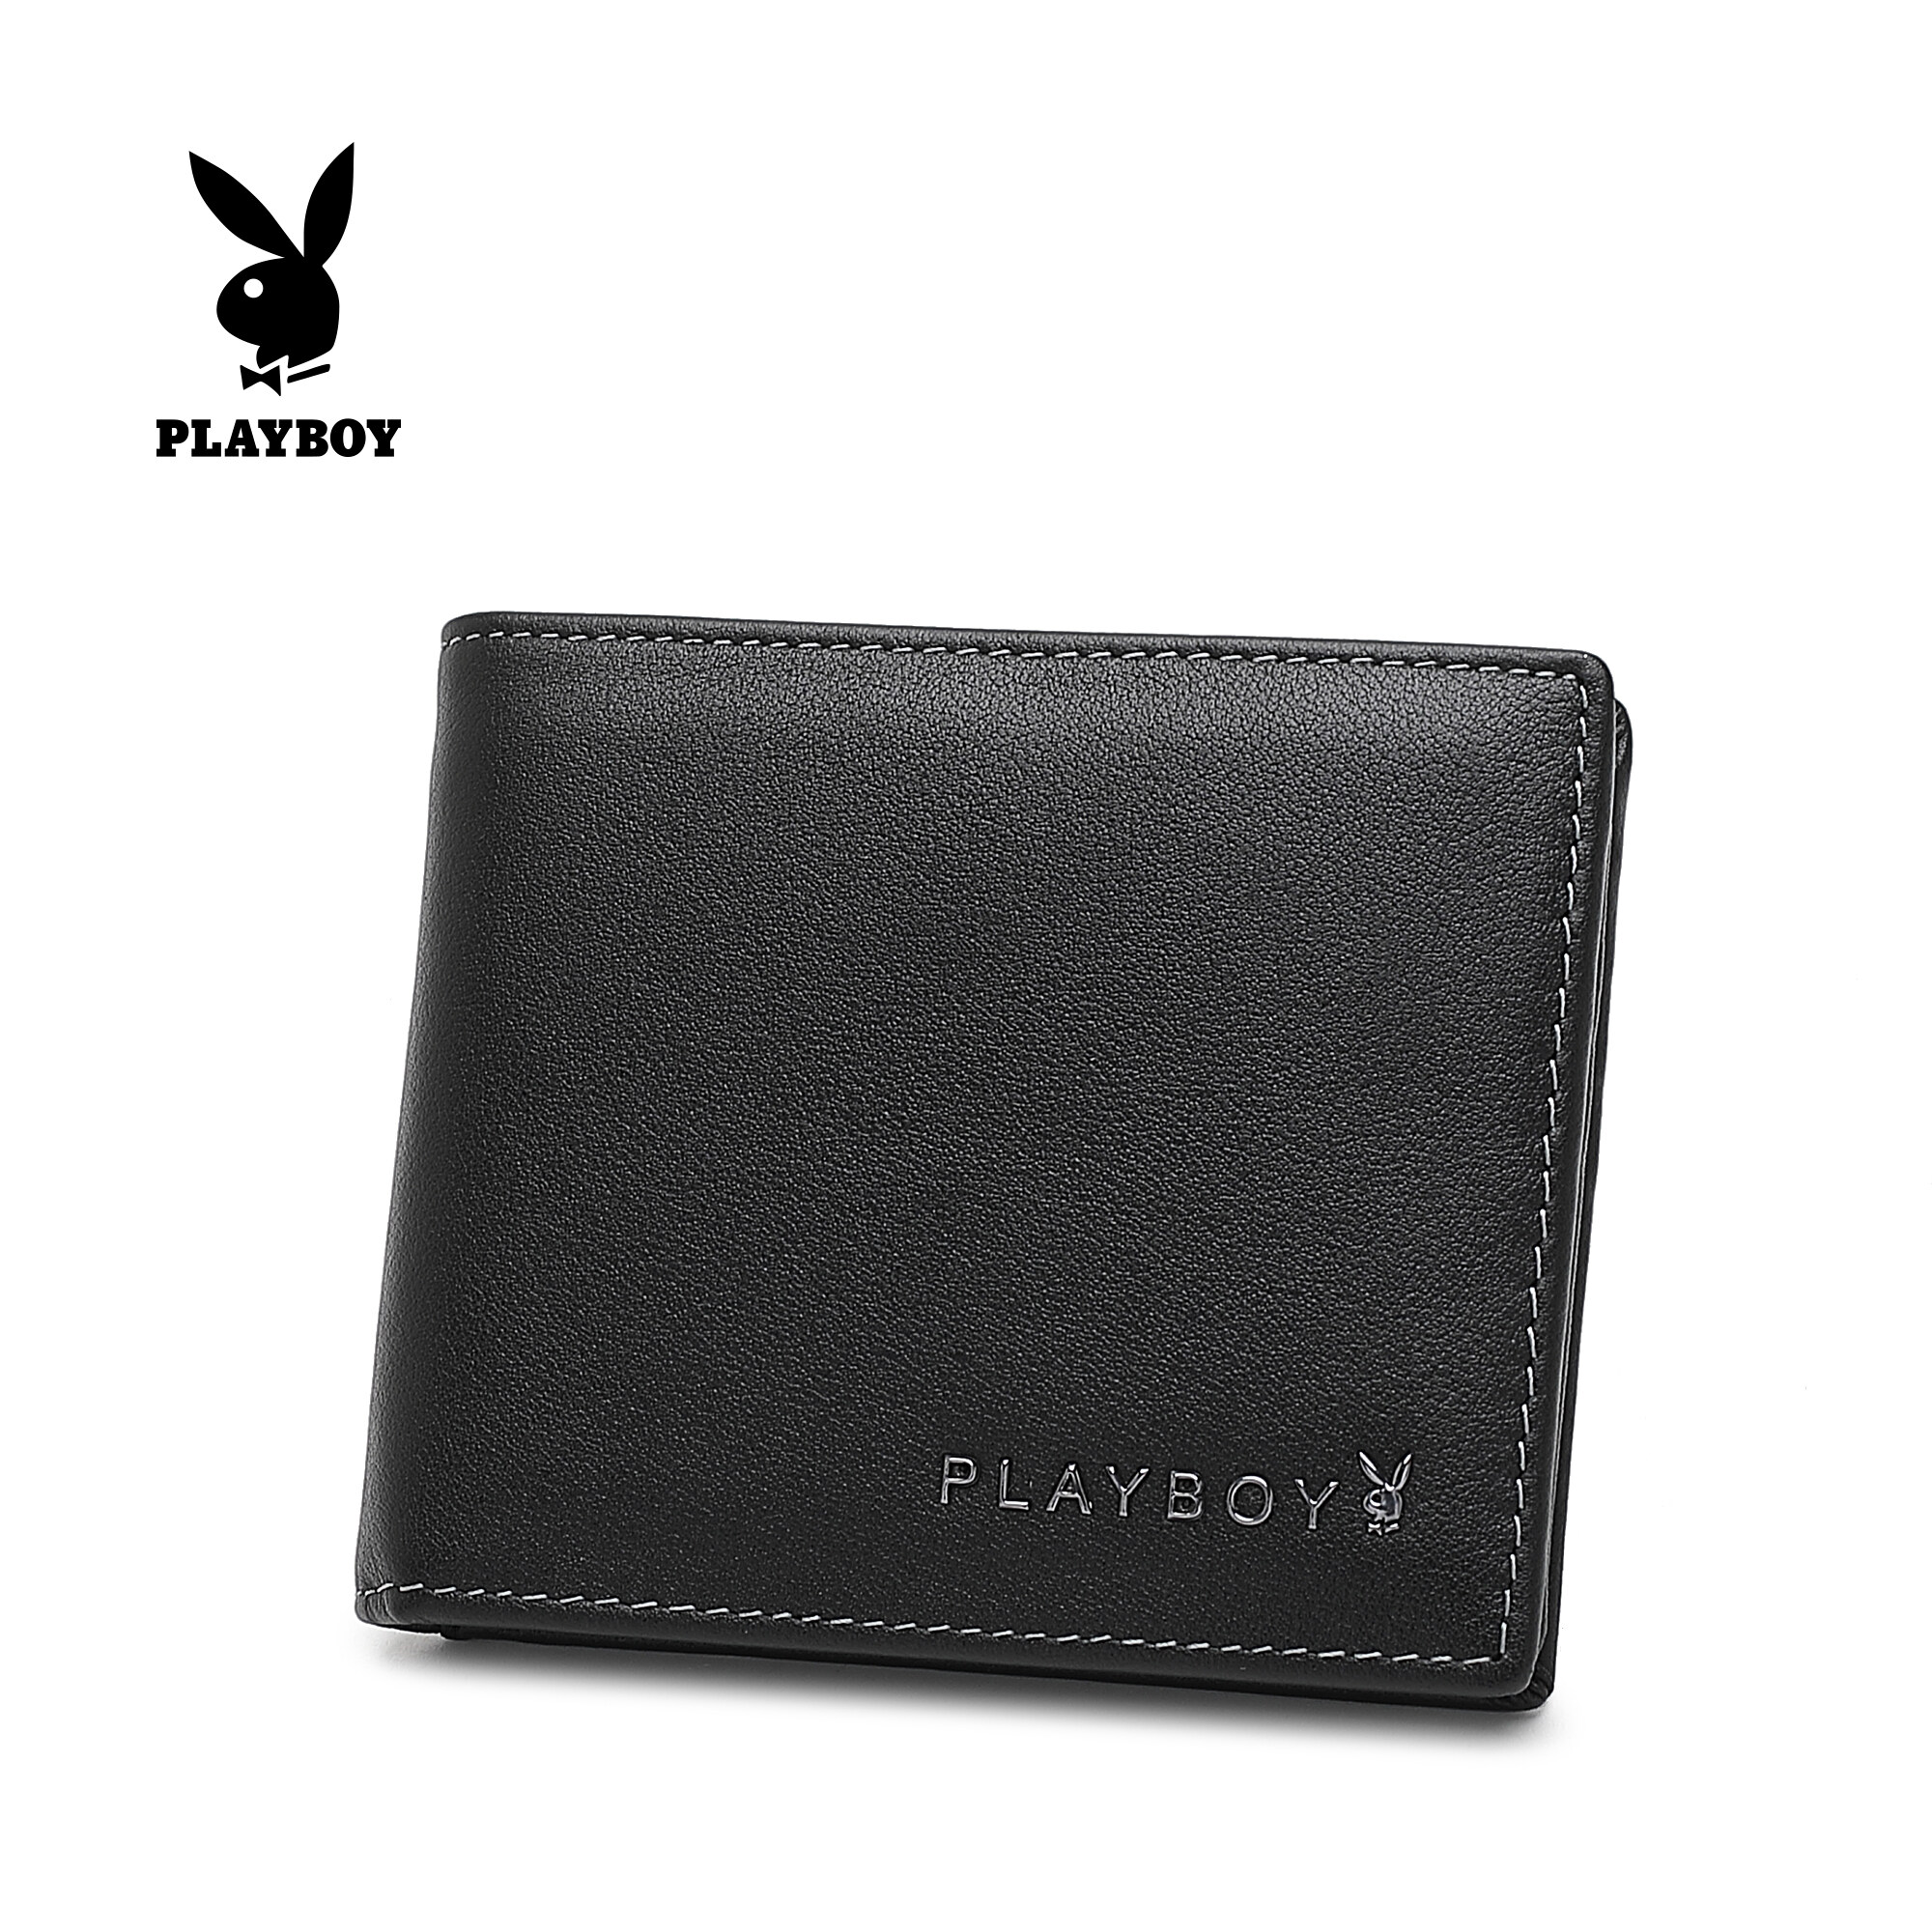 Playboy Genuine Leather RFID Wallet PW 278-3/PW 279-5/PW 280-3 Multi Color